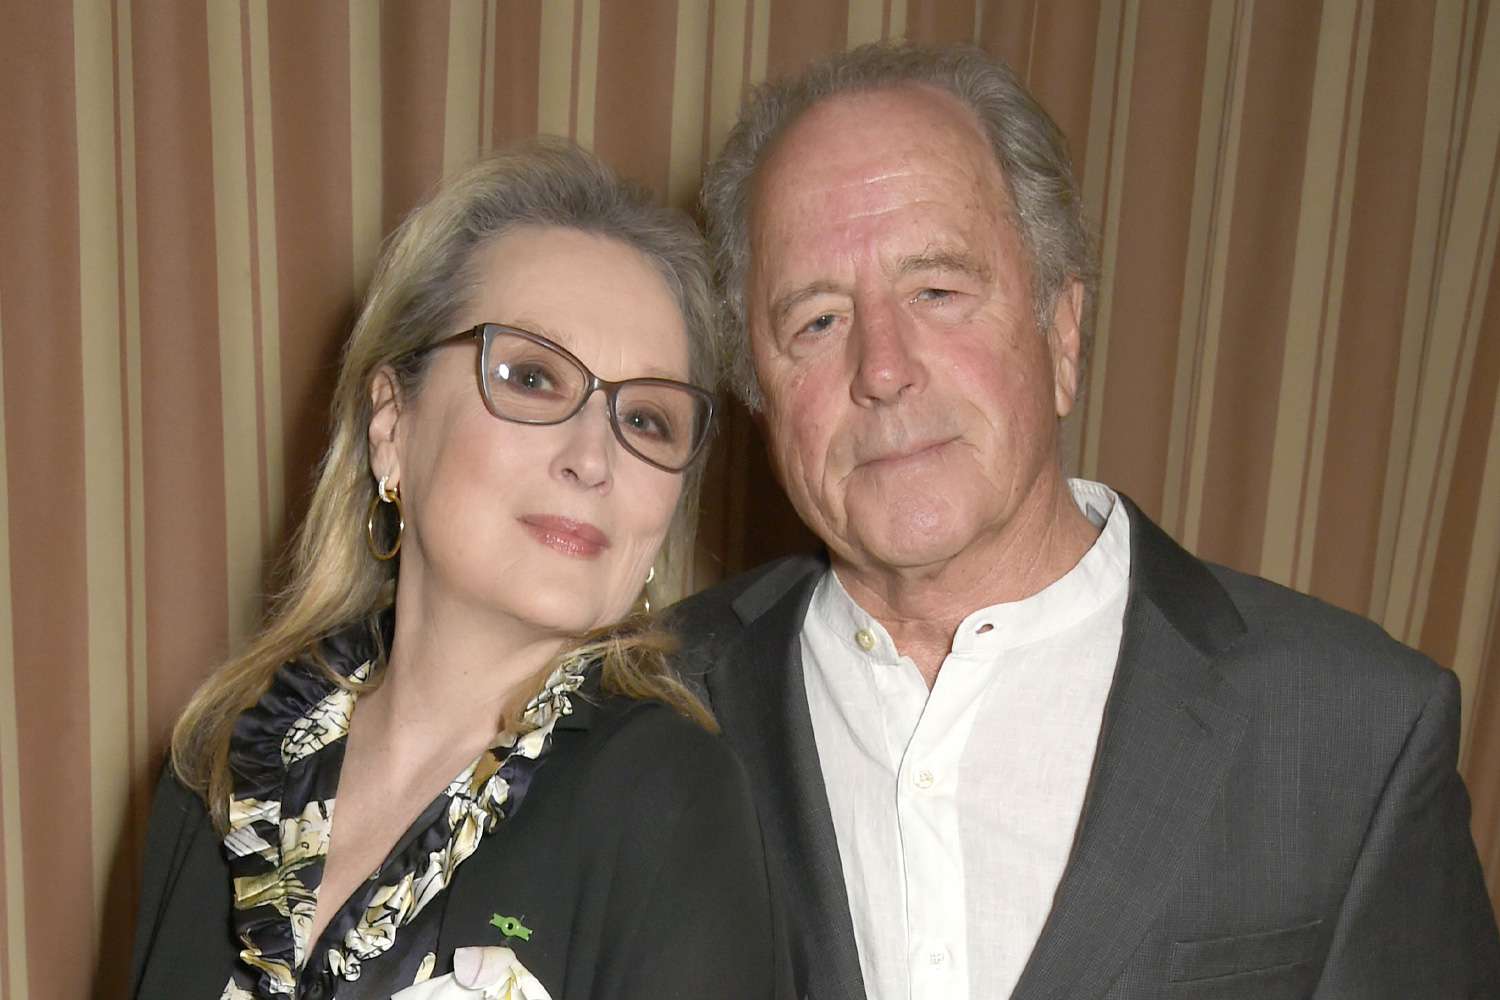 Meryl Streep And Husband Don Gummer Living Separate Lives For Years: Reports